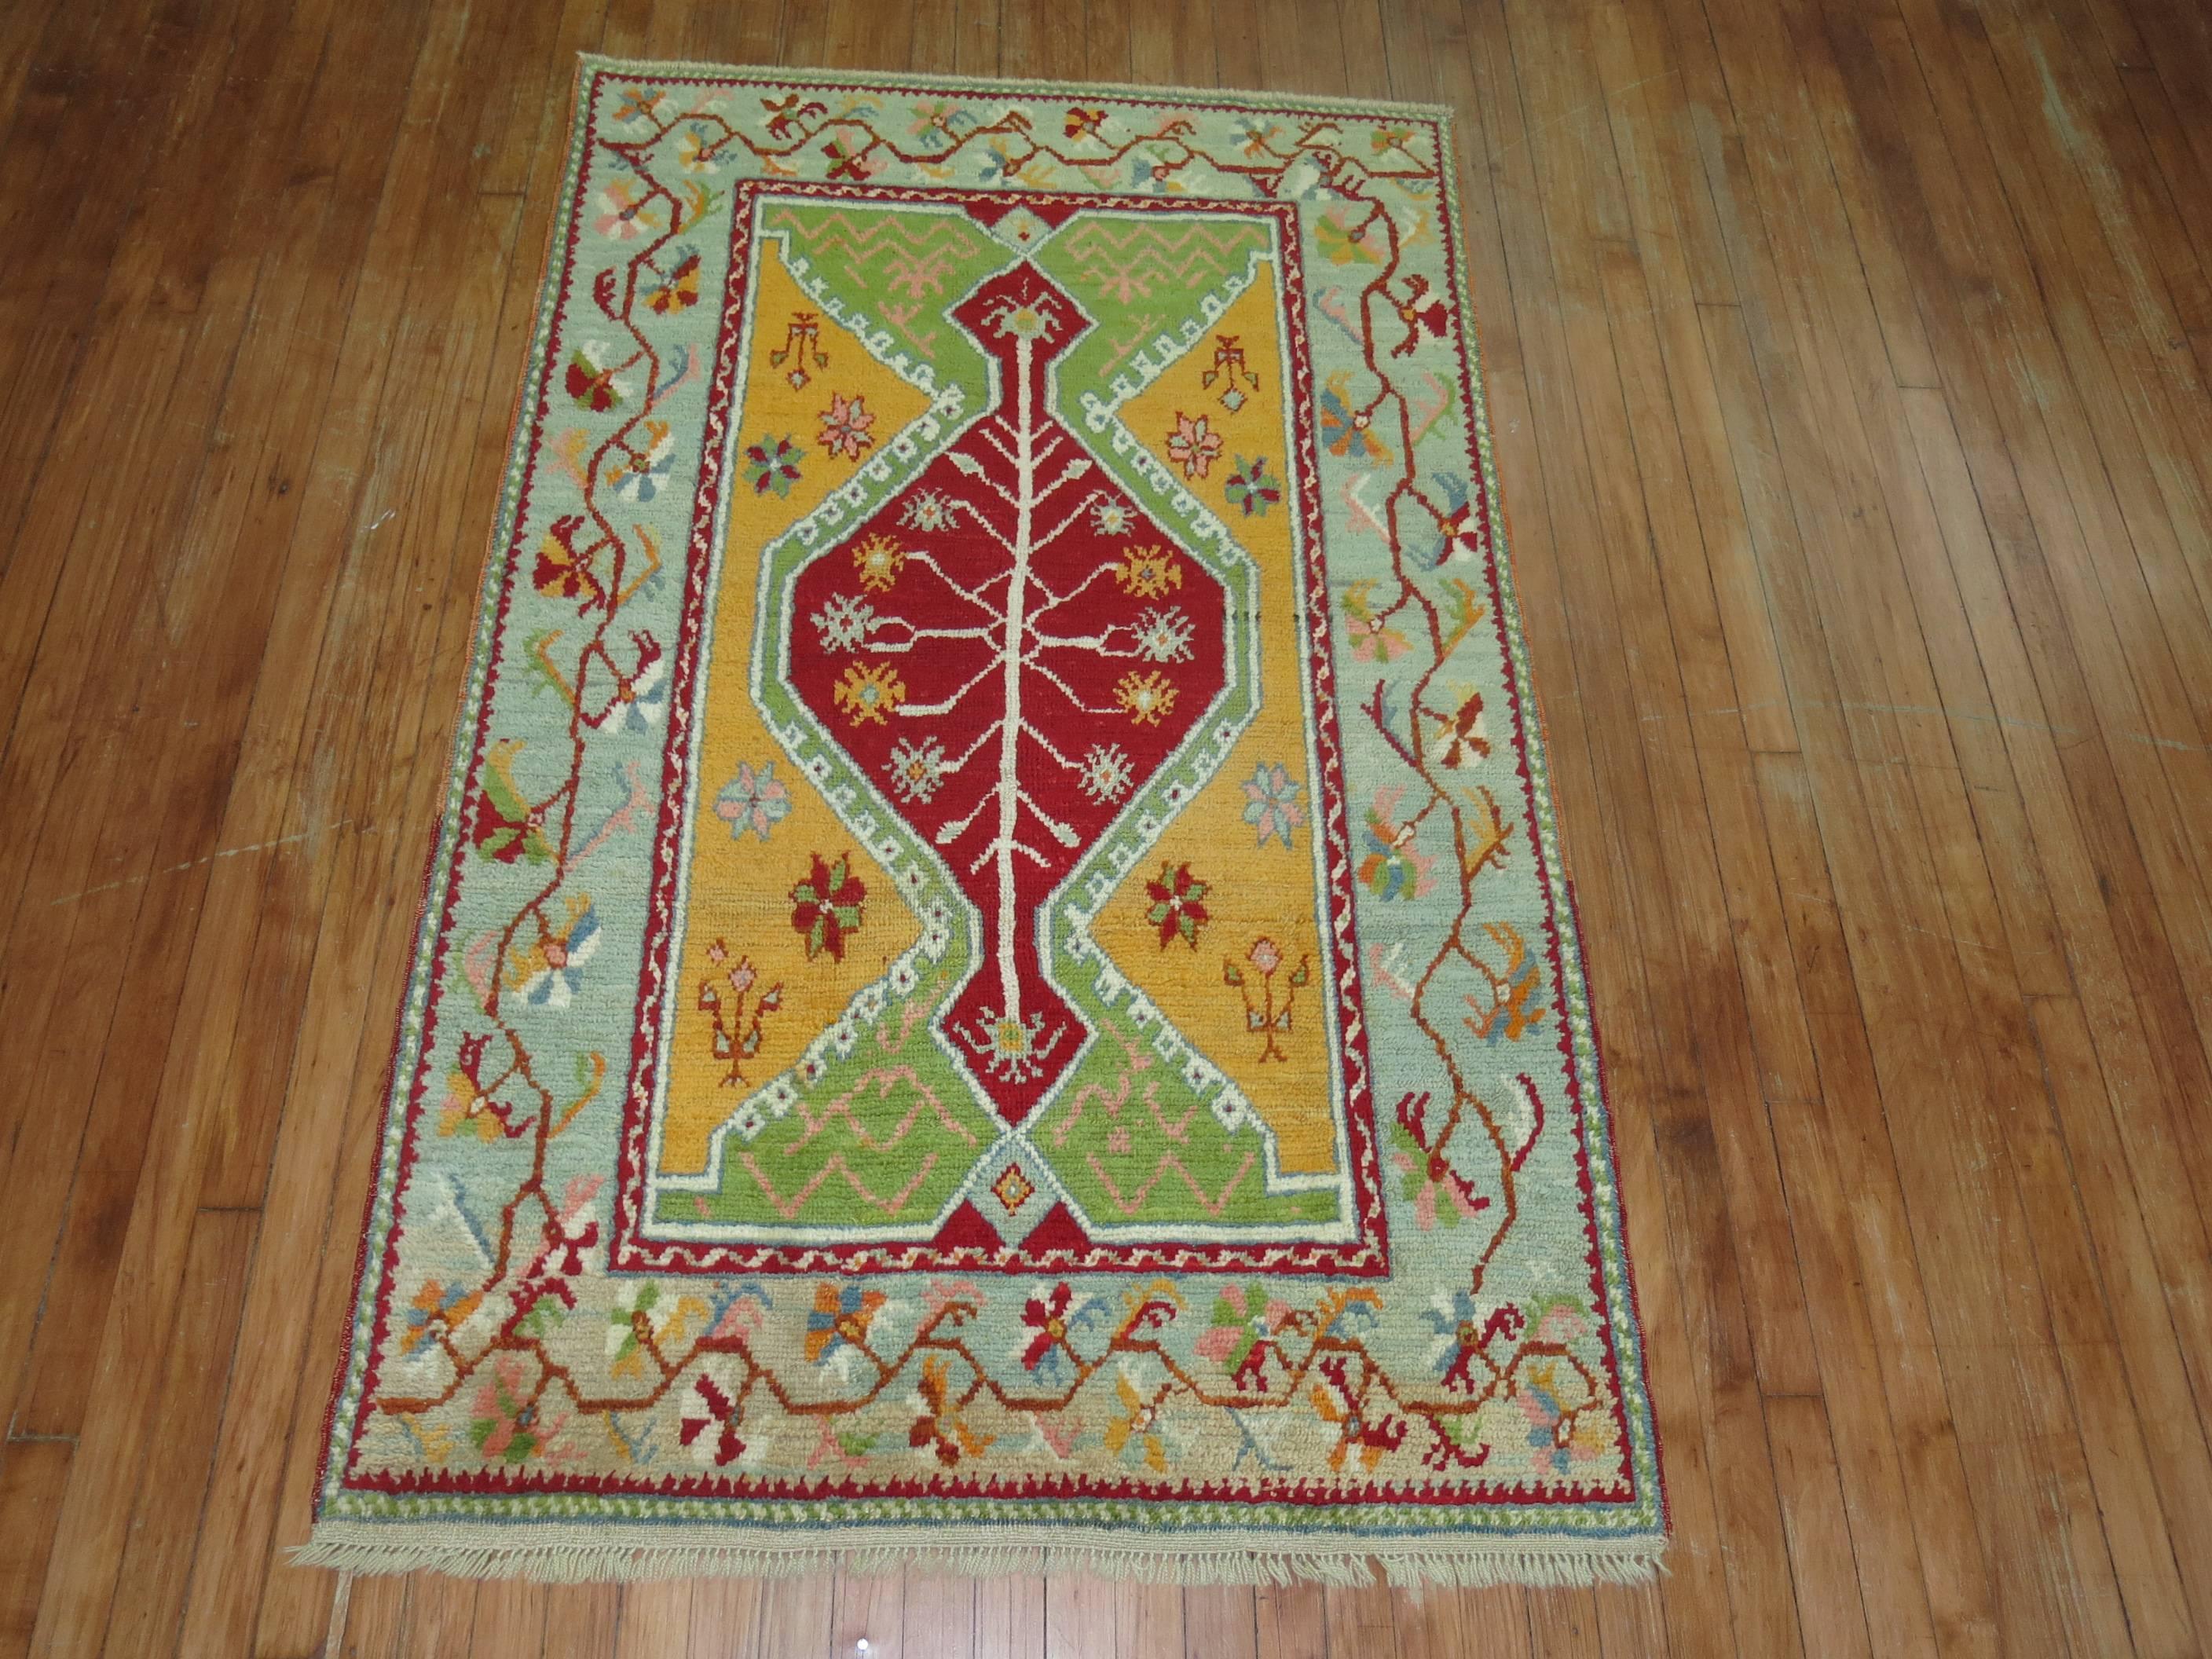 Accent size Turkish Ghiordes rug featuring bright vibrant colors.

Measures: 3'9'' x 6'.